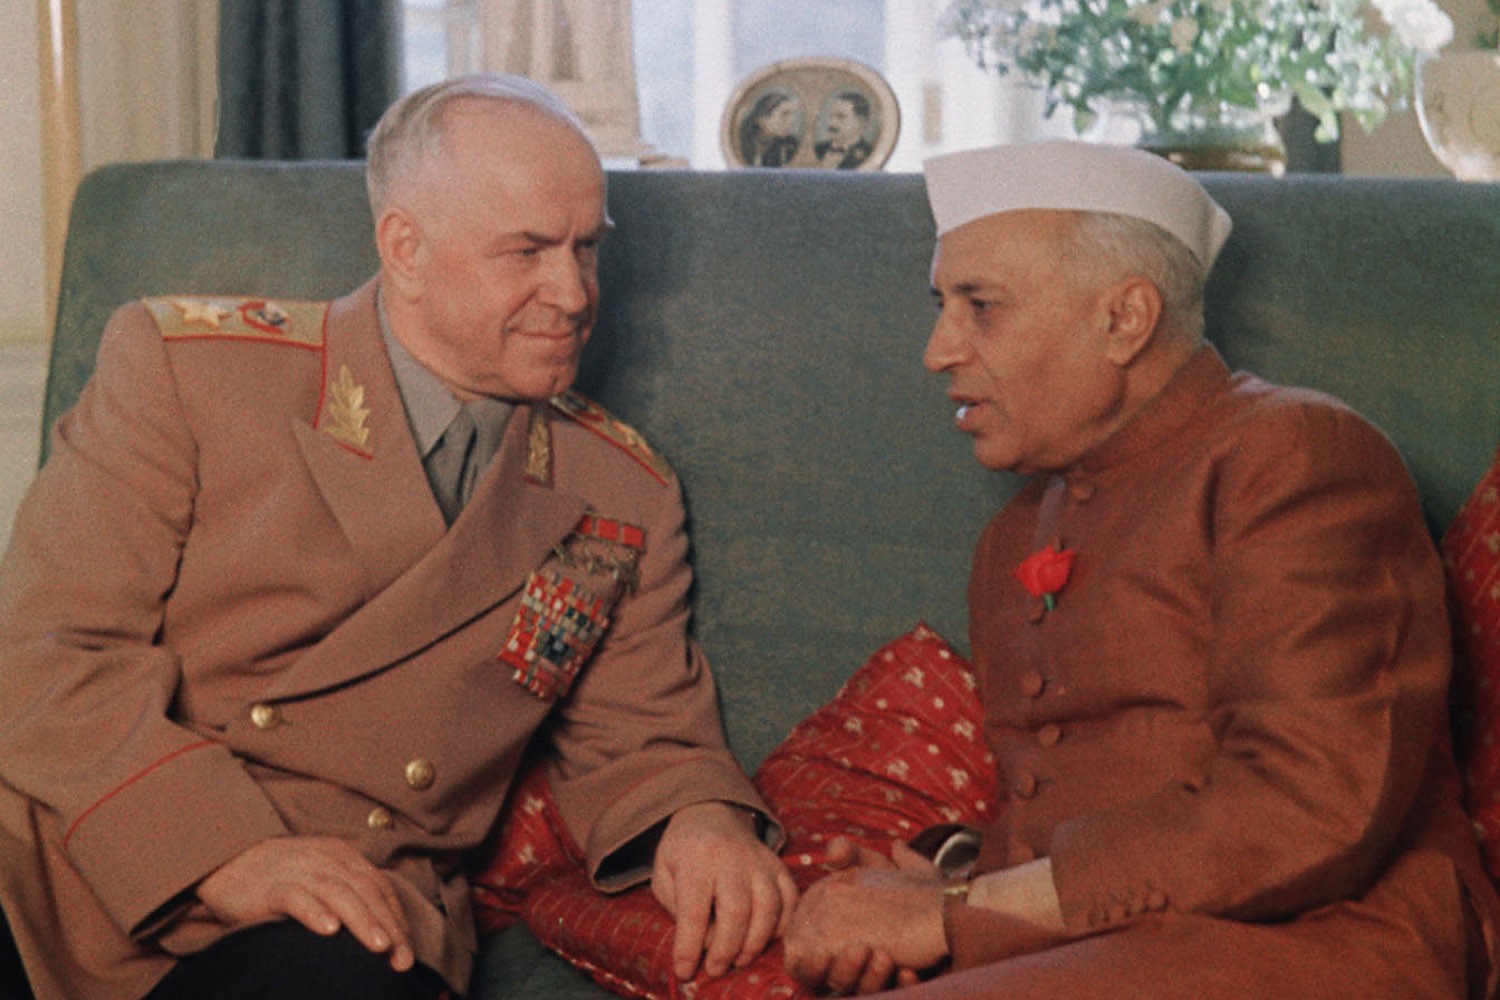 In 1956, Soviet Defense Minister Georgy Zhukov (left) and Indian Prime Minister Jawaharlal Nehru met in New Delhi for negotiations.